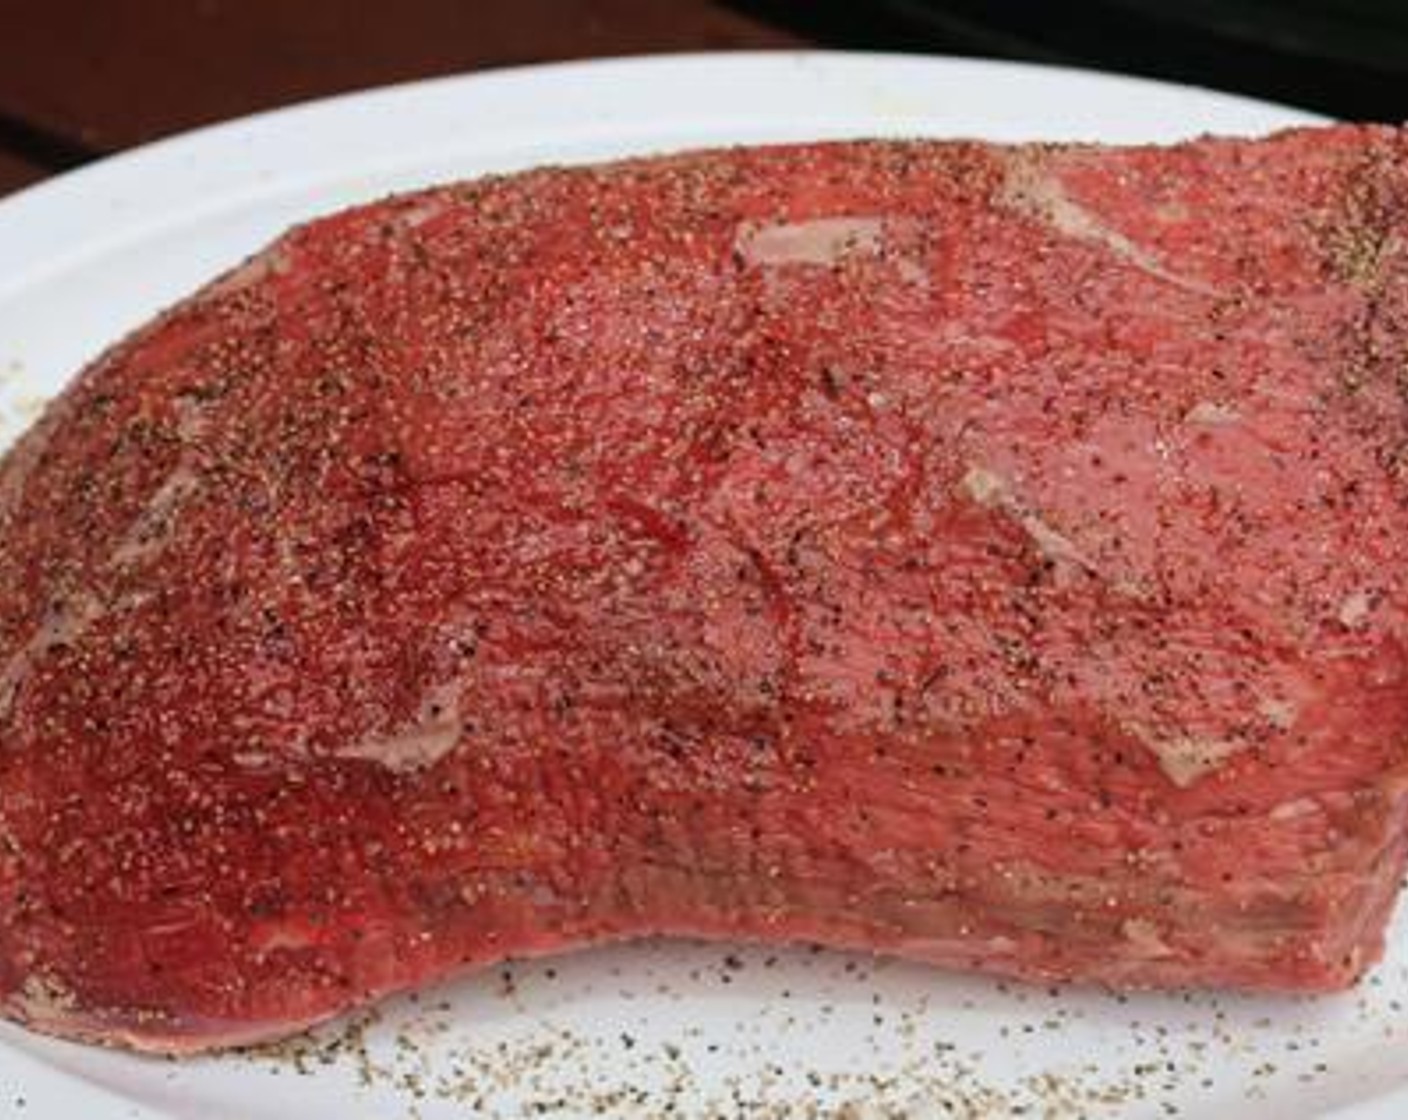 step 2 Rub Olive Oil (2 Tbsp) over the surface of the Eye of Round Beef Roasts (4 lb) and season with Kosher Salt (1 Tbsp) and Freshly Ground Black Pepper (1 Tbsp) on all sides.